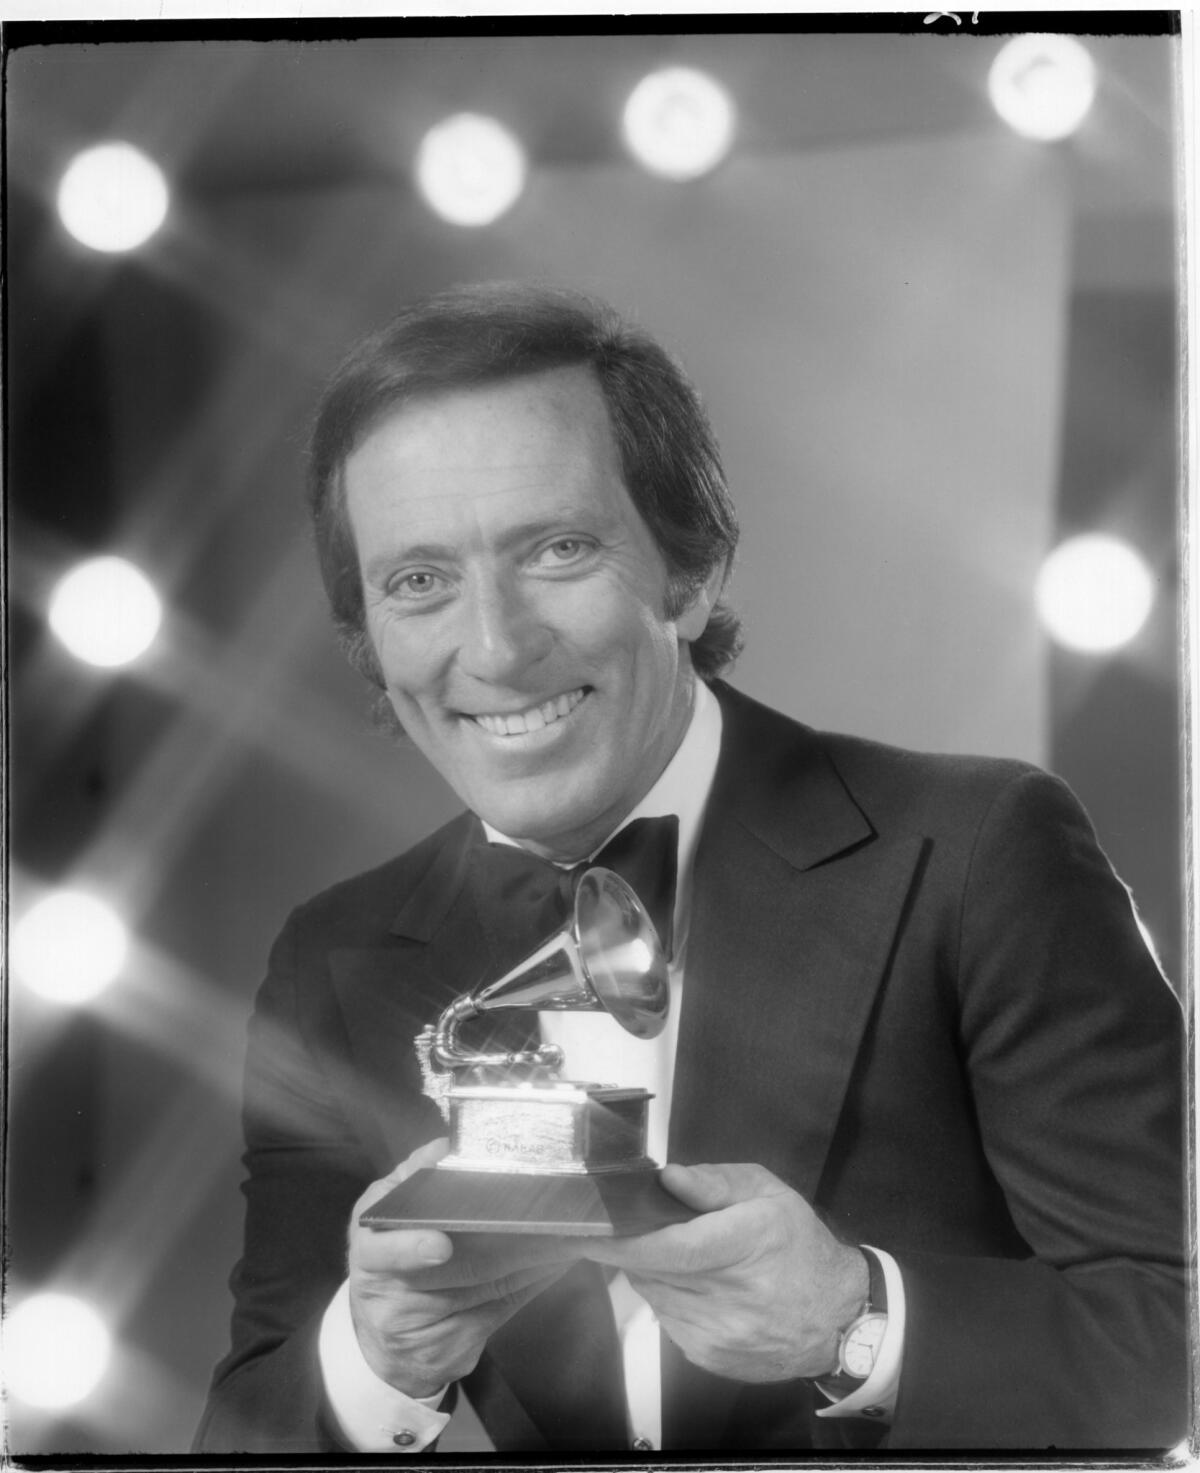 Andy Williams was the first live telecast host for the Grammy Awards, serving from 1971 through 1977. Though nominated as an artist for six Grammys, he never won one.